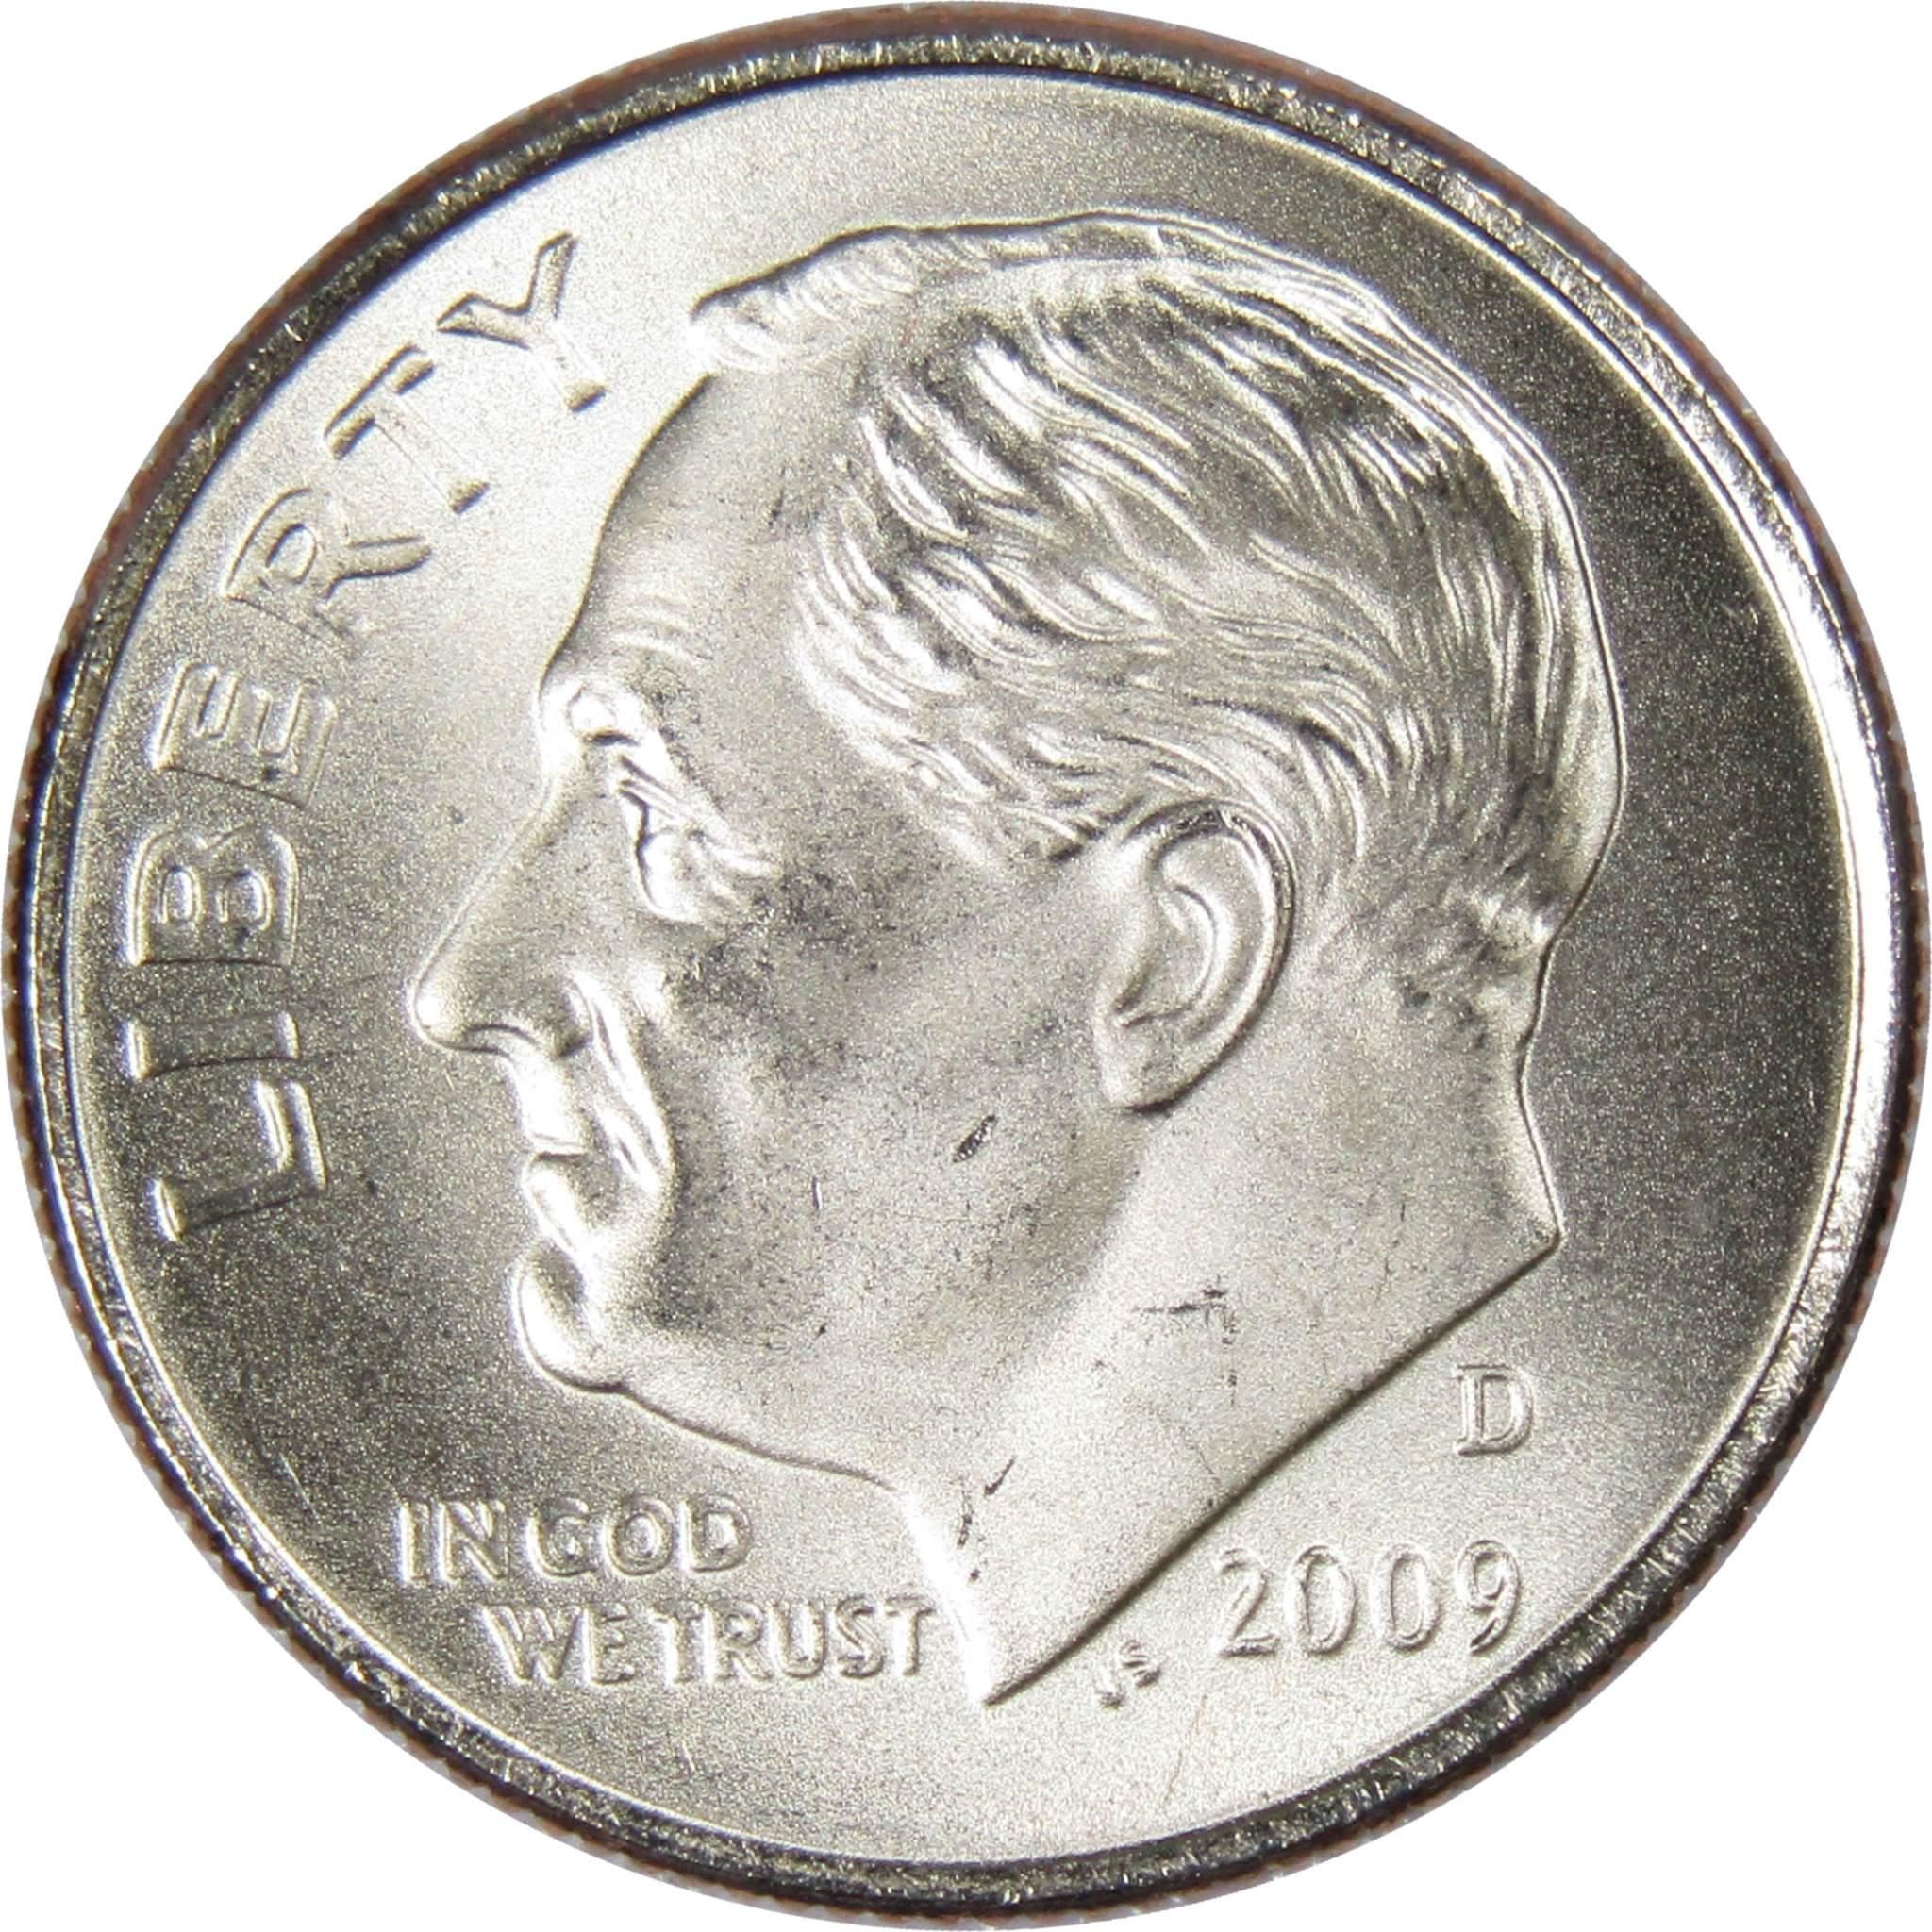 2009 D Roosevelt Dime BU Uncirculated Mint State 10c US Coin Collectible